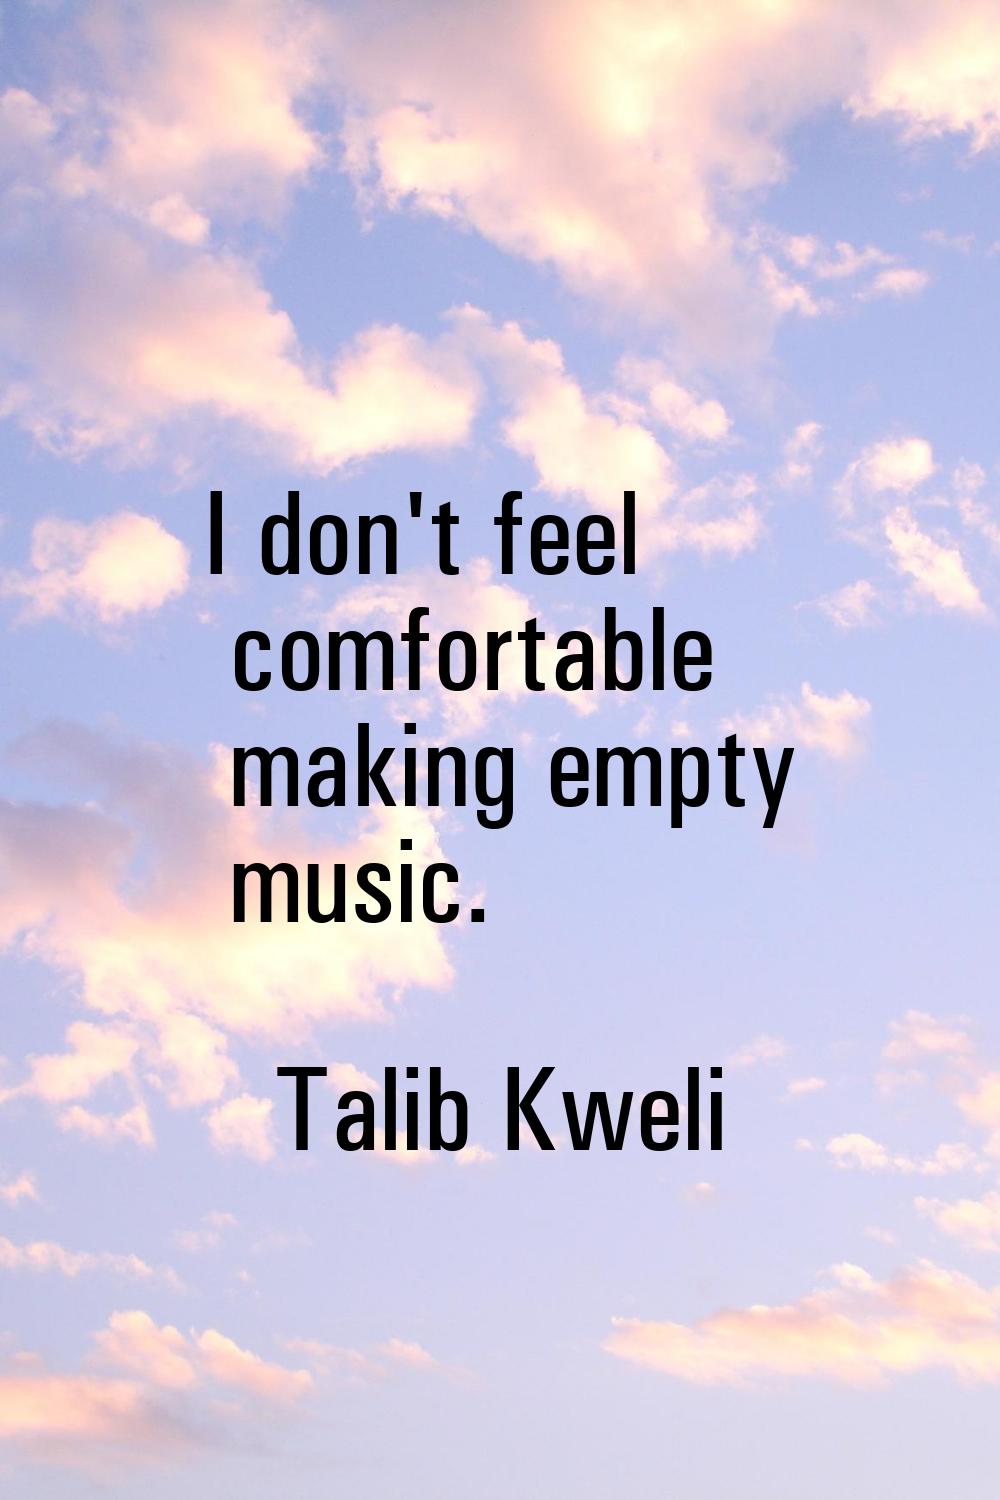 I don't feel comfortable making empty music.